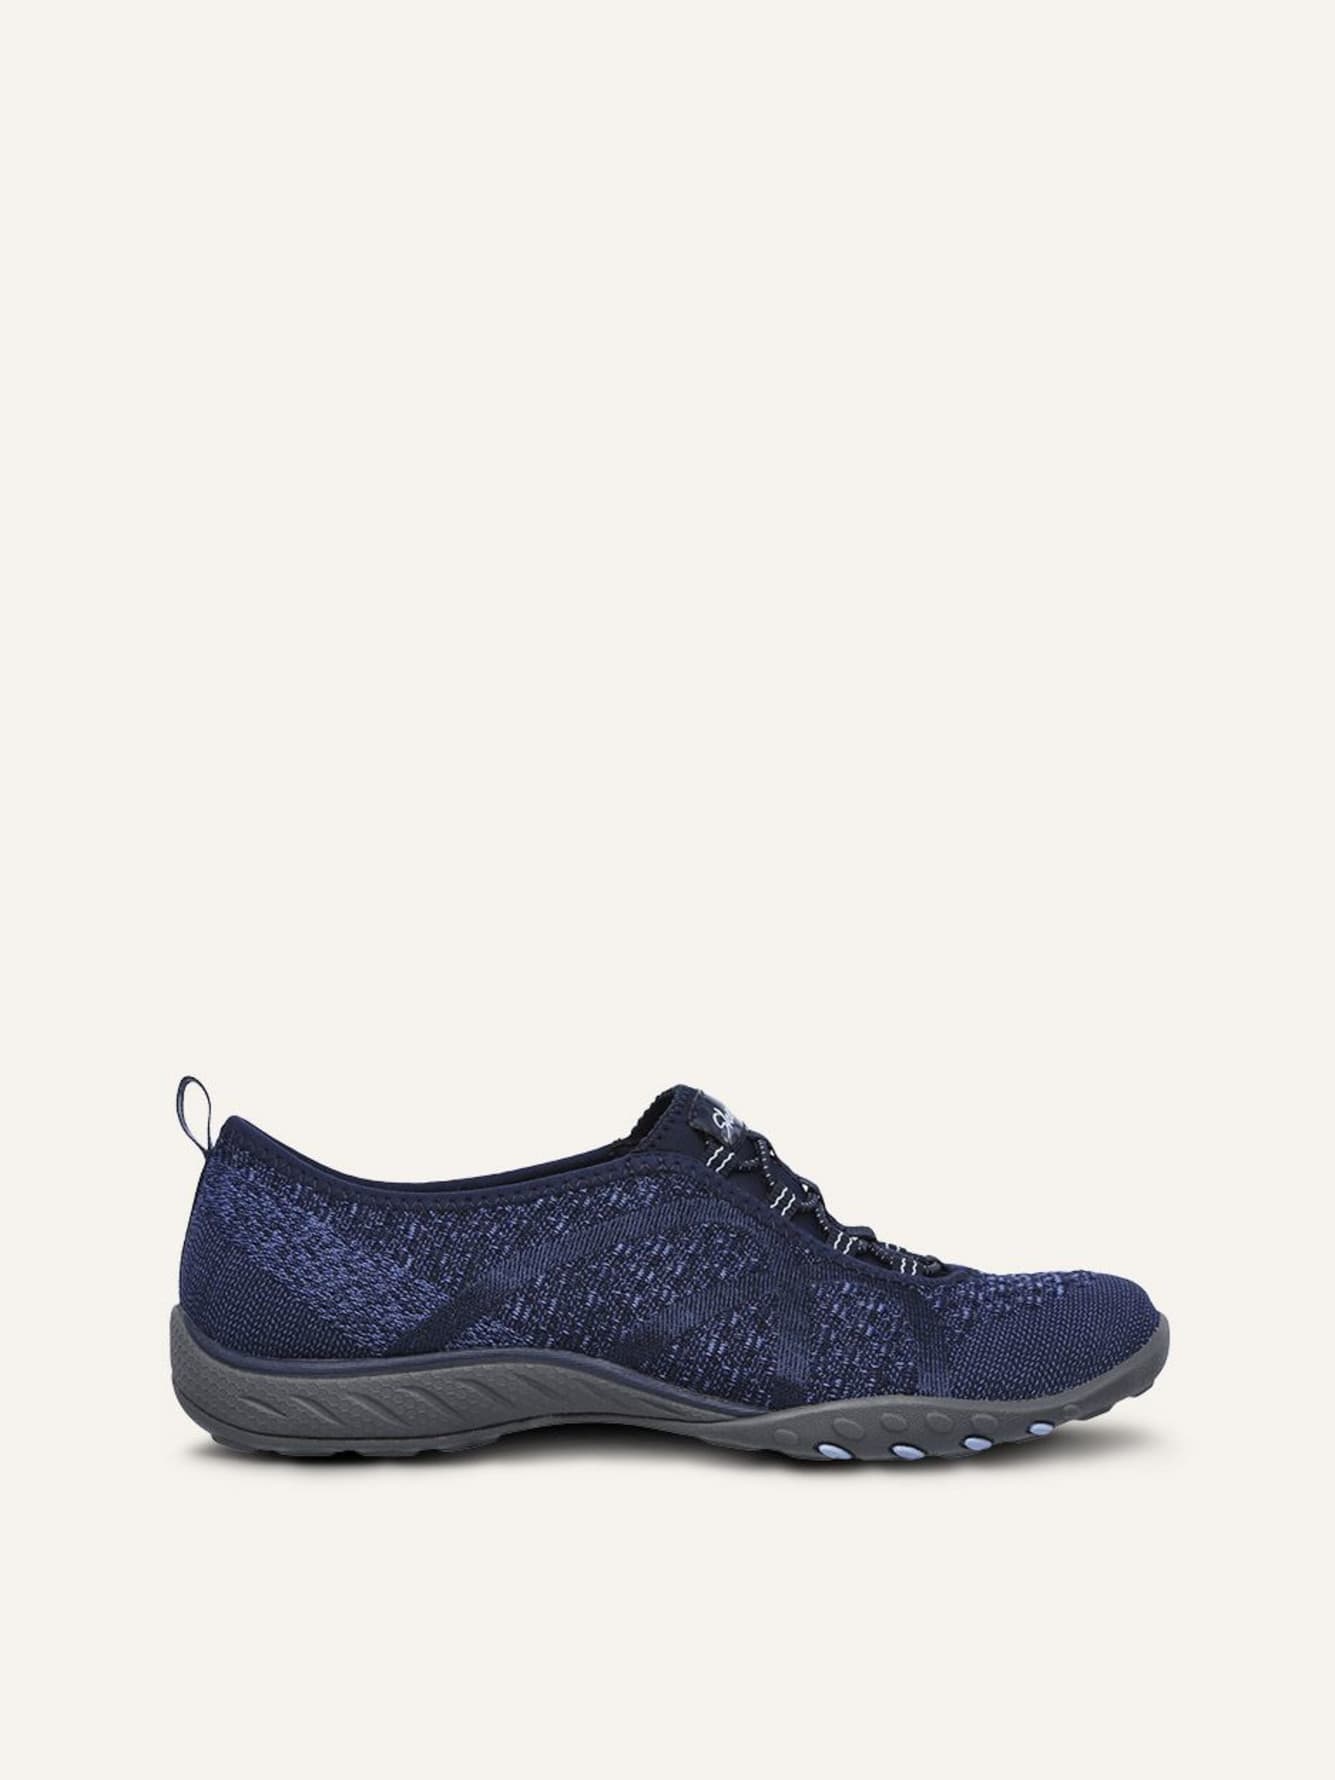 Skechers Relaxed Fit, Breathe Easy 